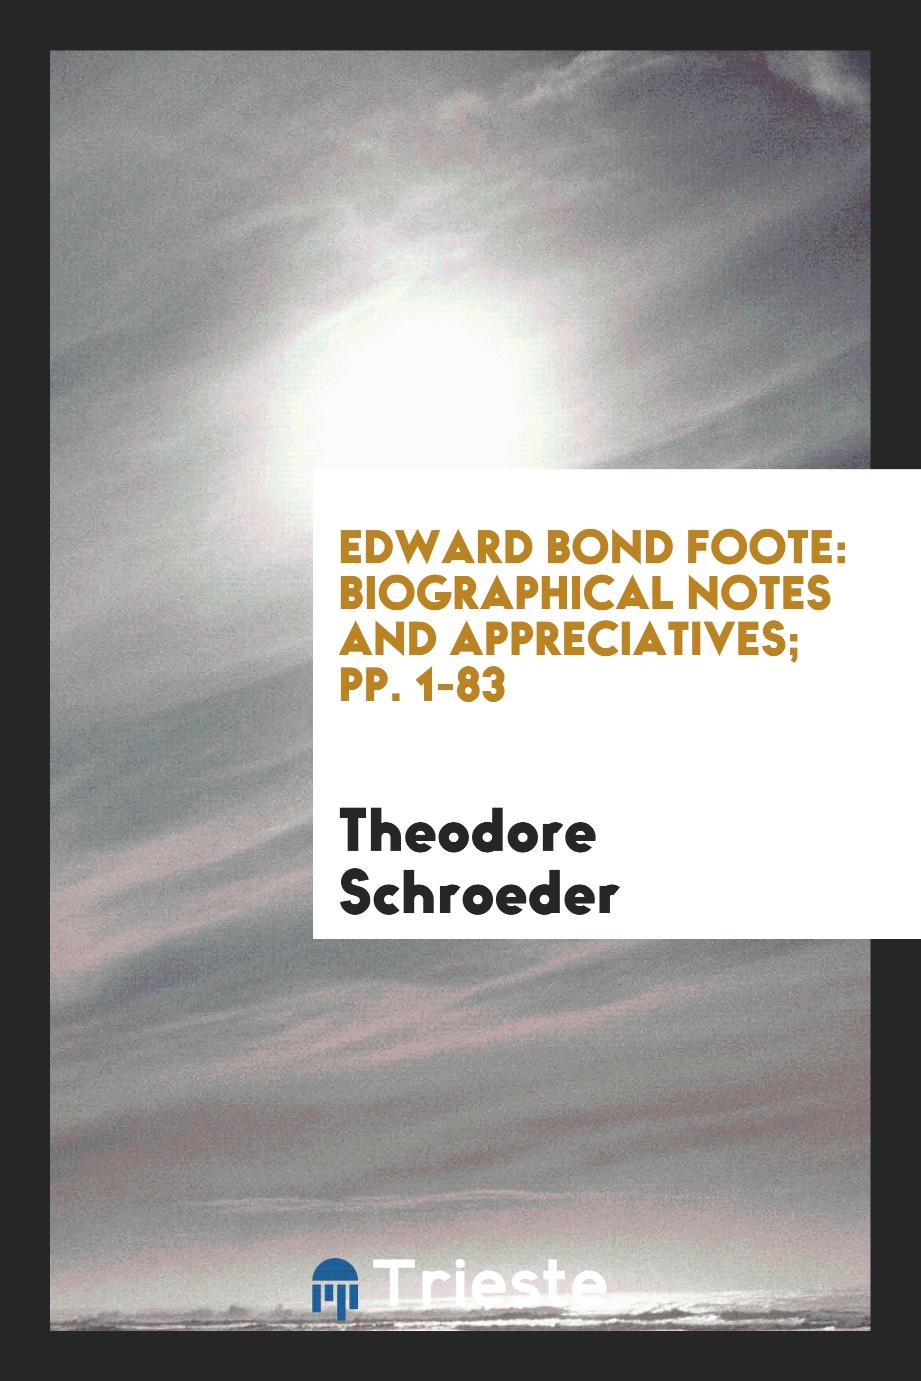 Edward Bond Foote: Biographical Notes and Appreciatives; pp. 1-83